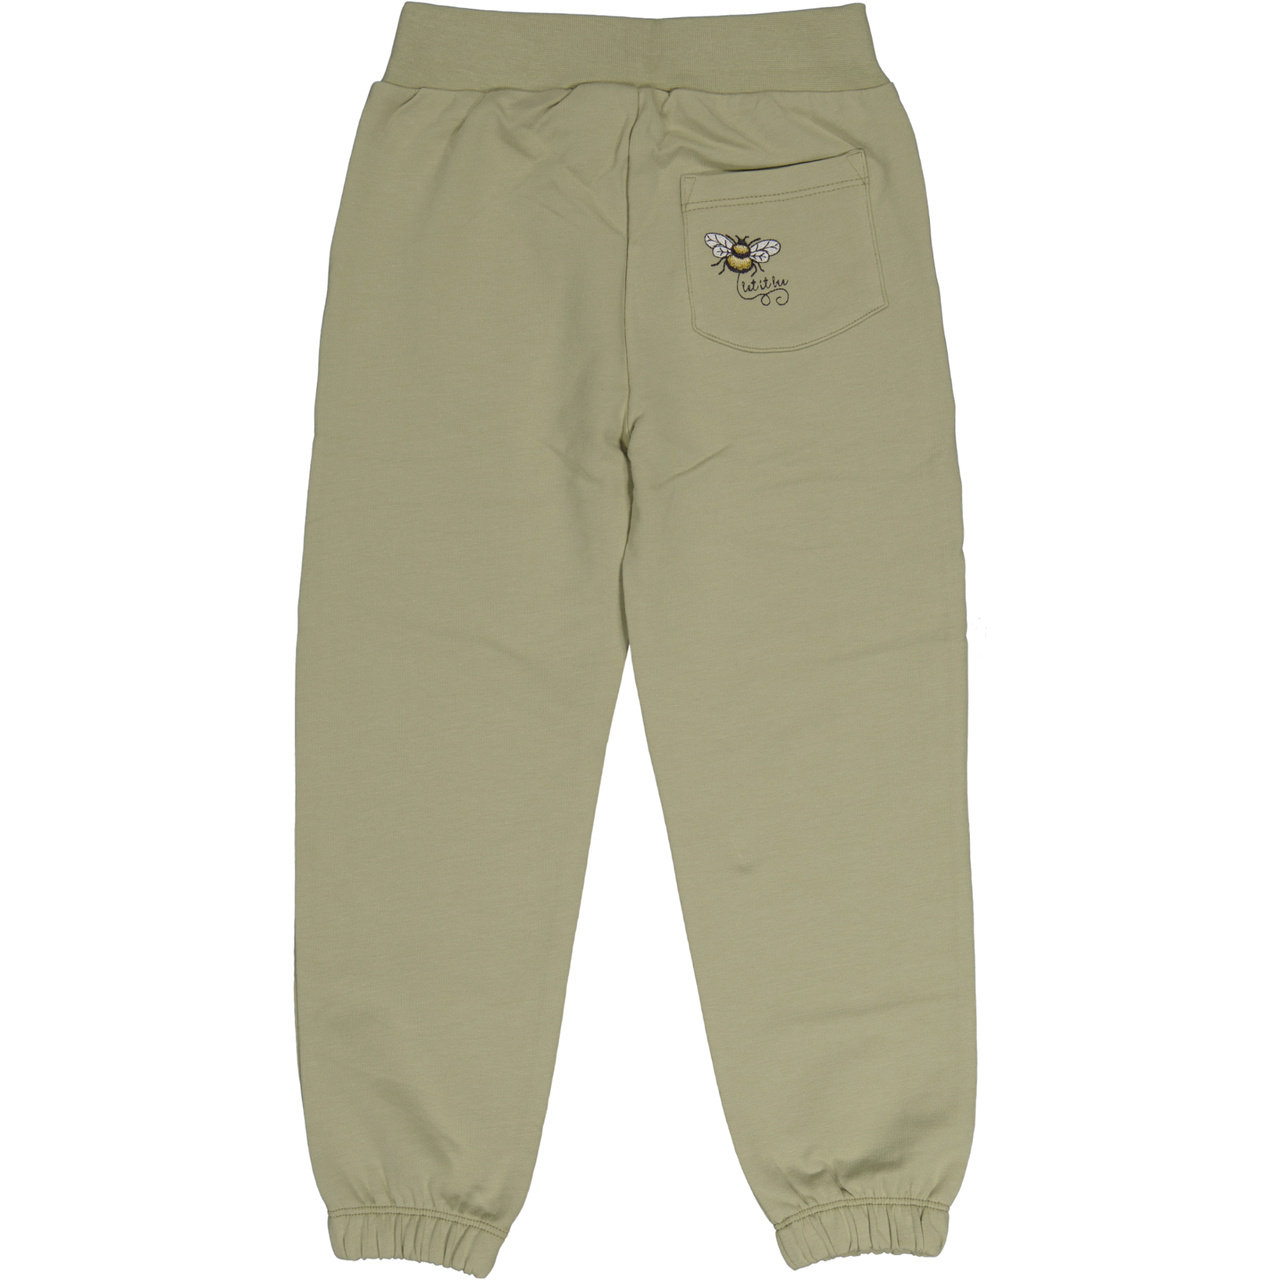 College trousers Olive 122/128